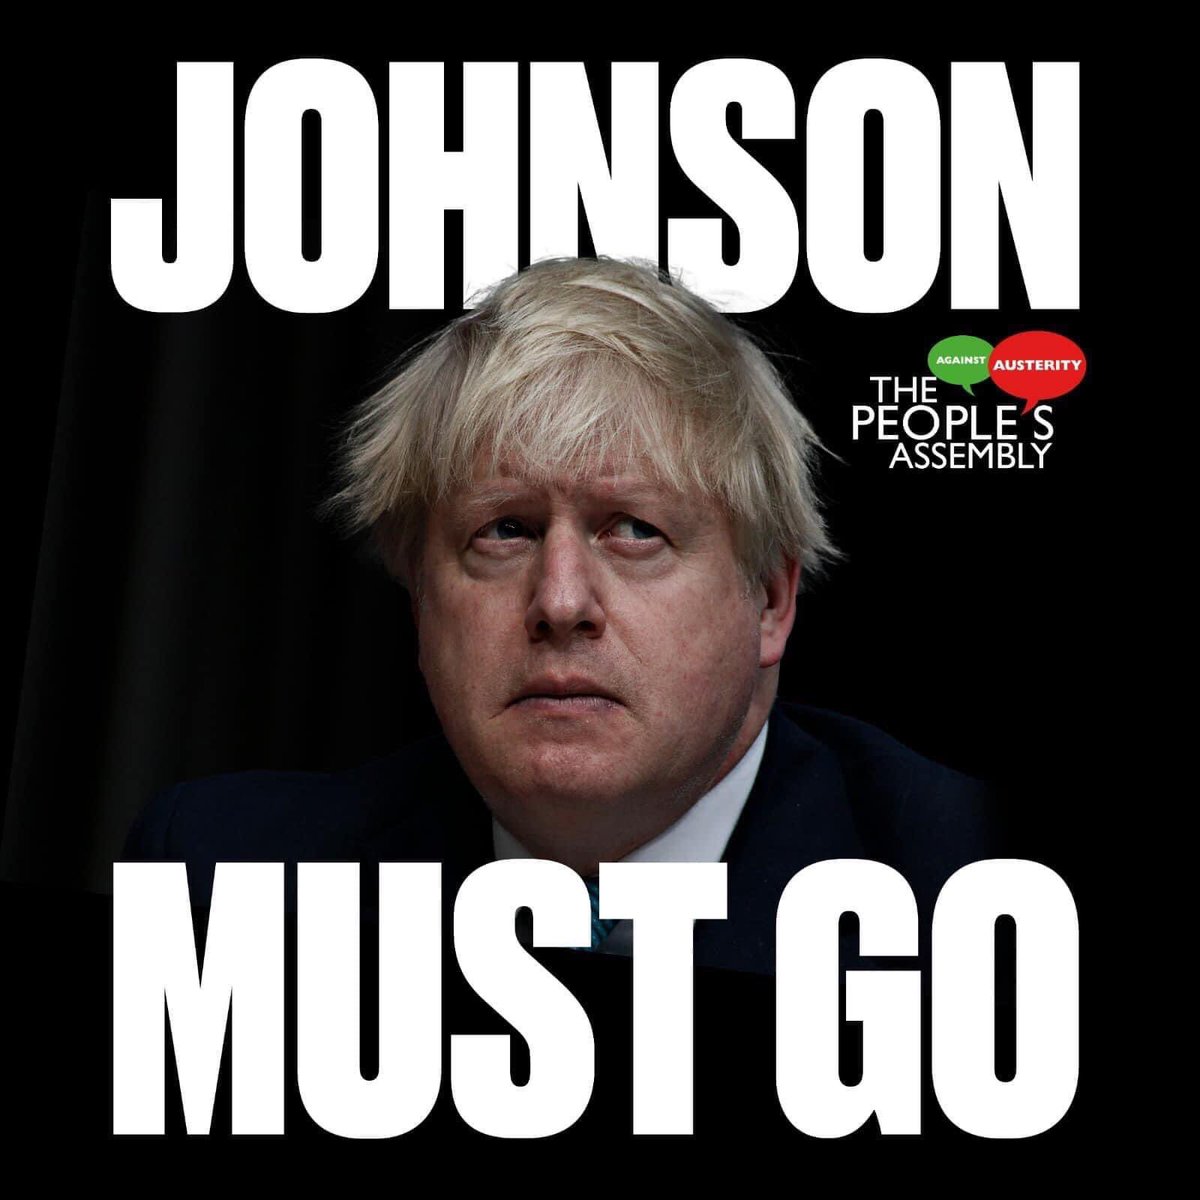 Today and every day until he is gone because #BorisJohnson told #ToryLies to @UKParliament & broke the #MinisterialCode so #JohnsonMustGo
#JohnsonOut156
#JohnsonOut157
#JohnsonOut158
#Partygate #r4today #ToryRailStrikes #ToryRailStrike #TivertonandHonitonByElection #Wakefield #G7